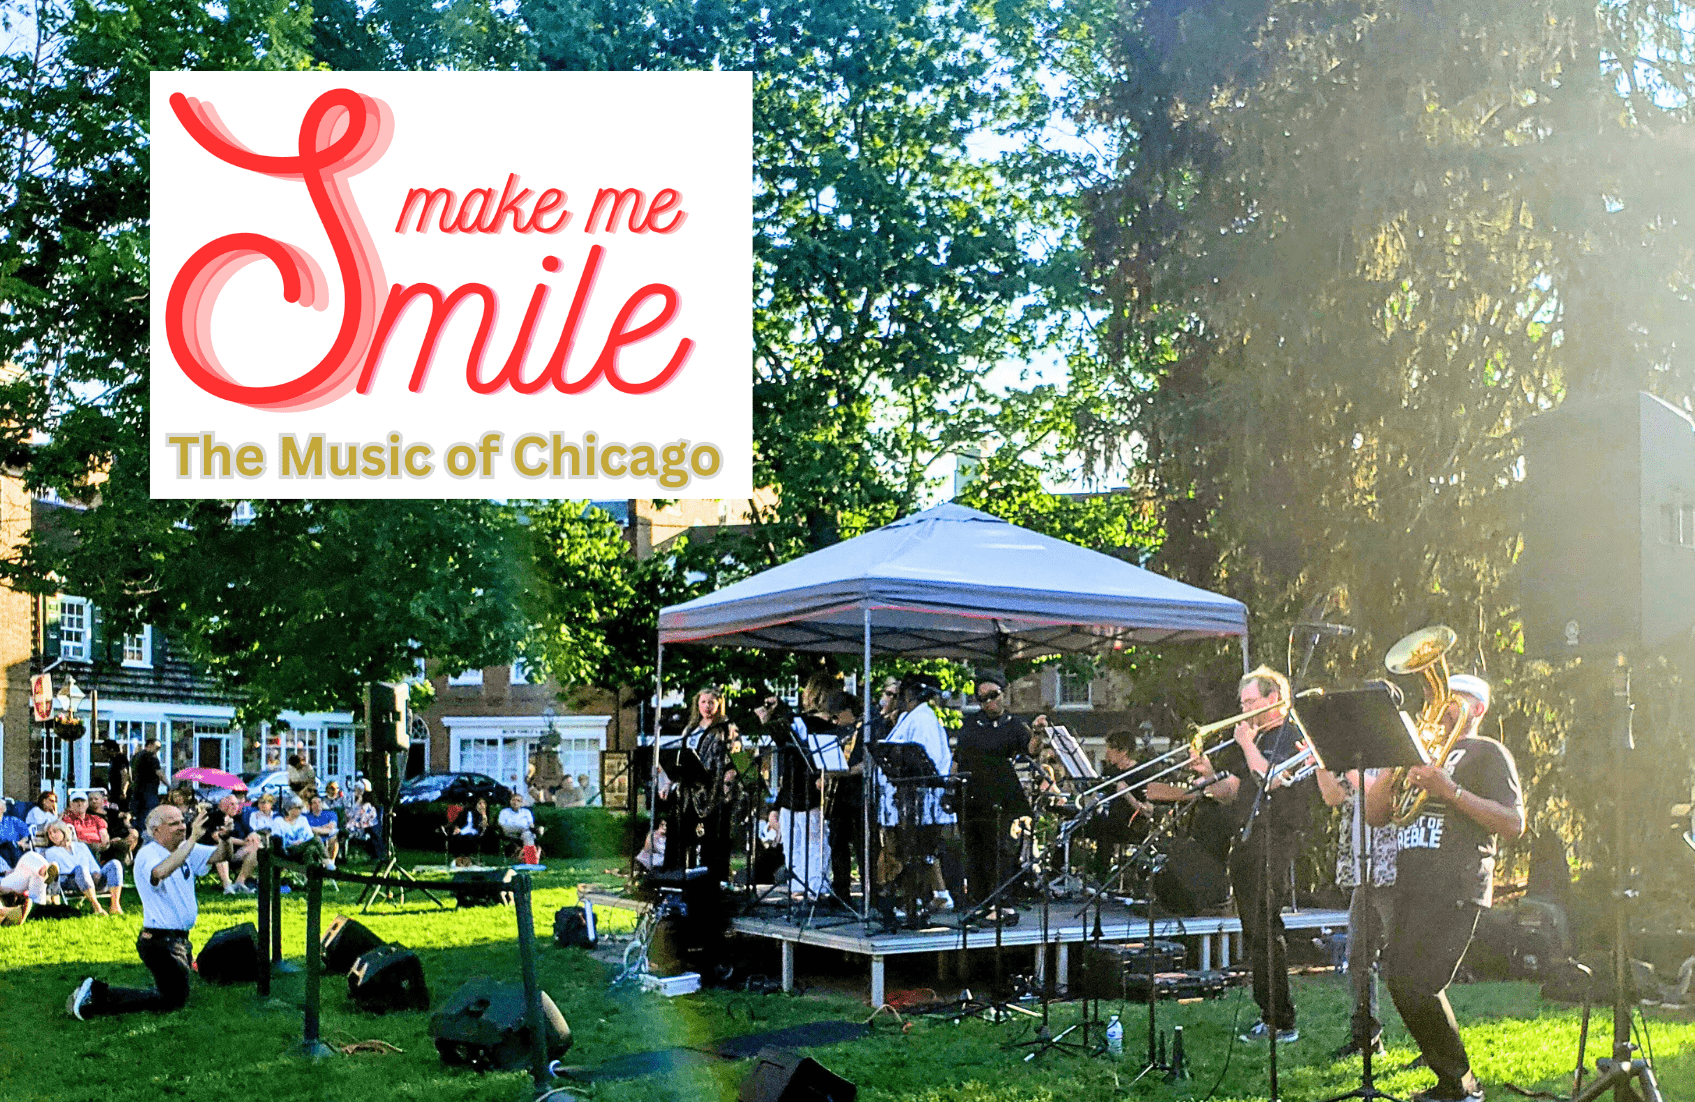 Make Me Smile, The Music of Chicago. Musicians playing instruments on a stage on a sunny day